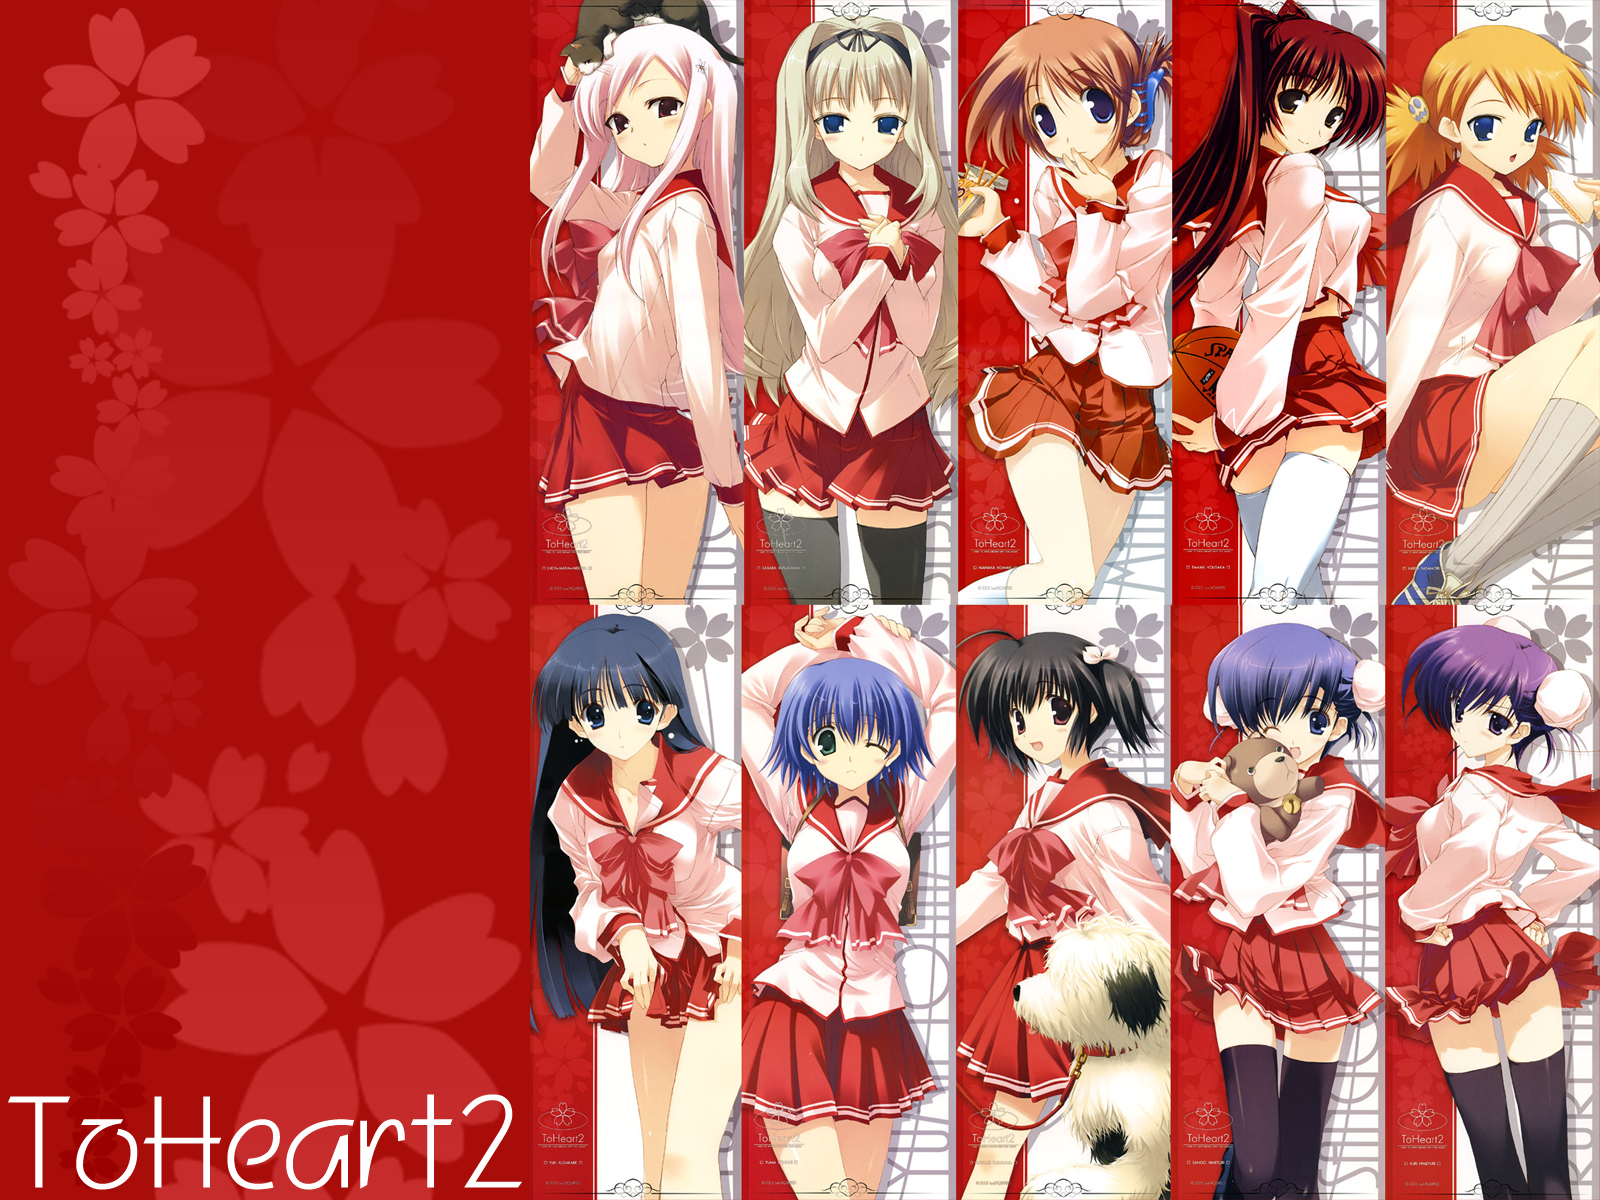 to heart 2 anime download free